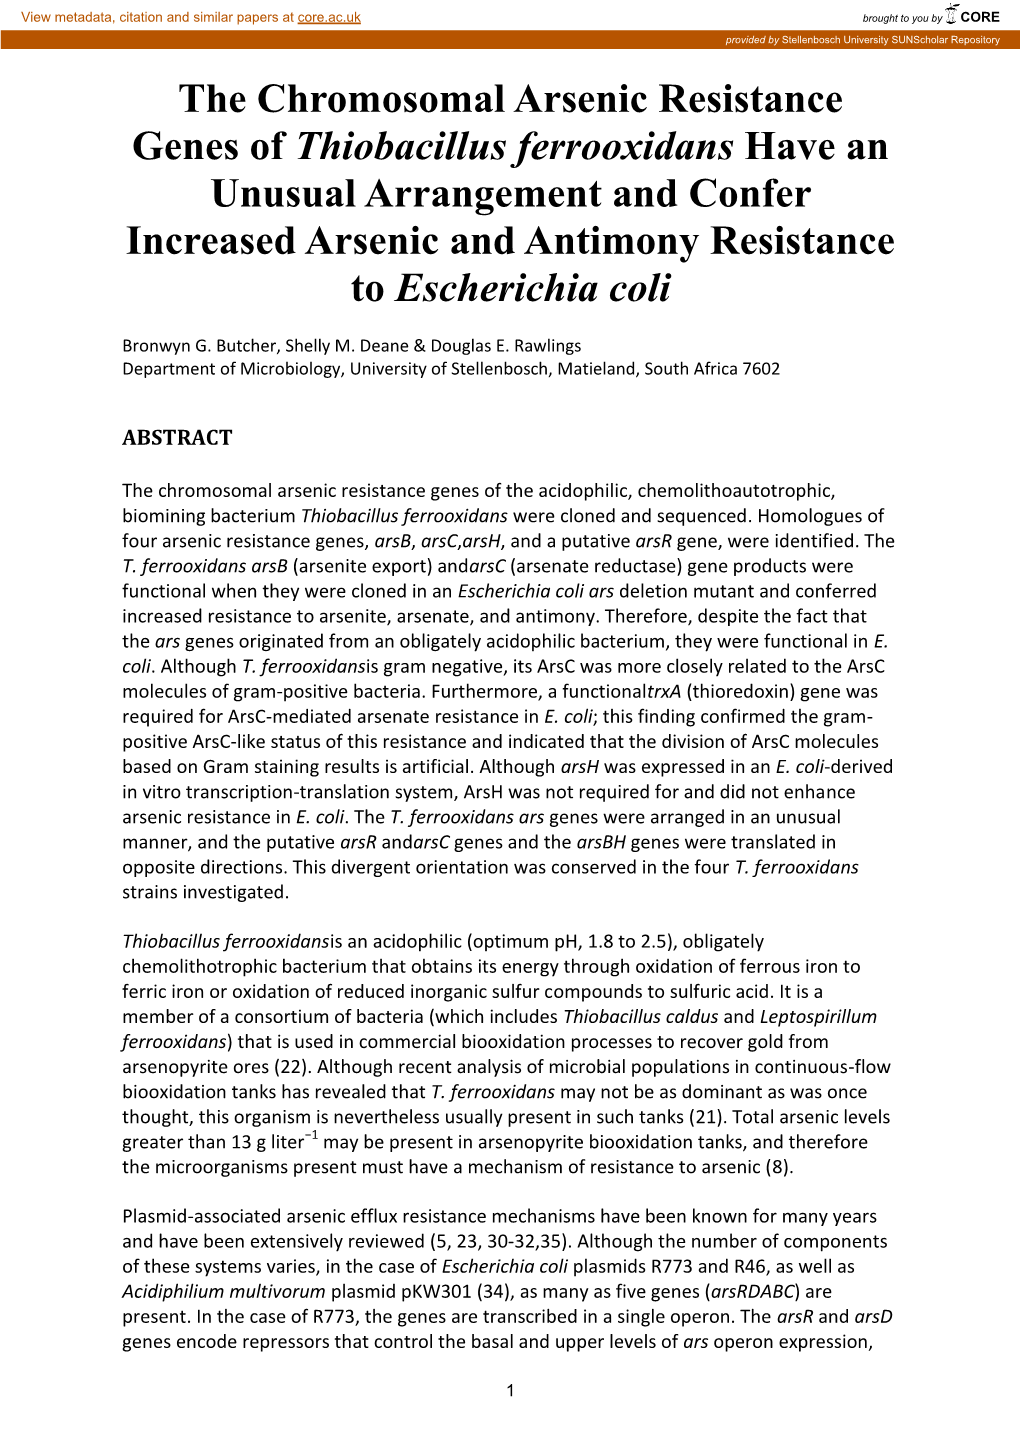 The Chromosomal Arsenic Resistance Genes of Thiobacillus Ferrooxidans Have an Unusual Arrangement and Confer Increased Arsenic A